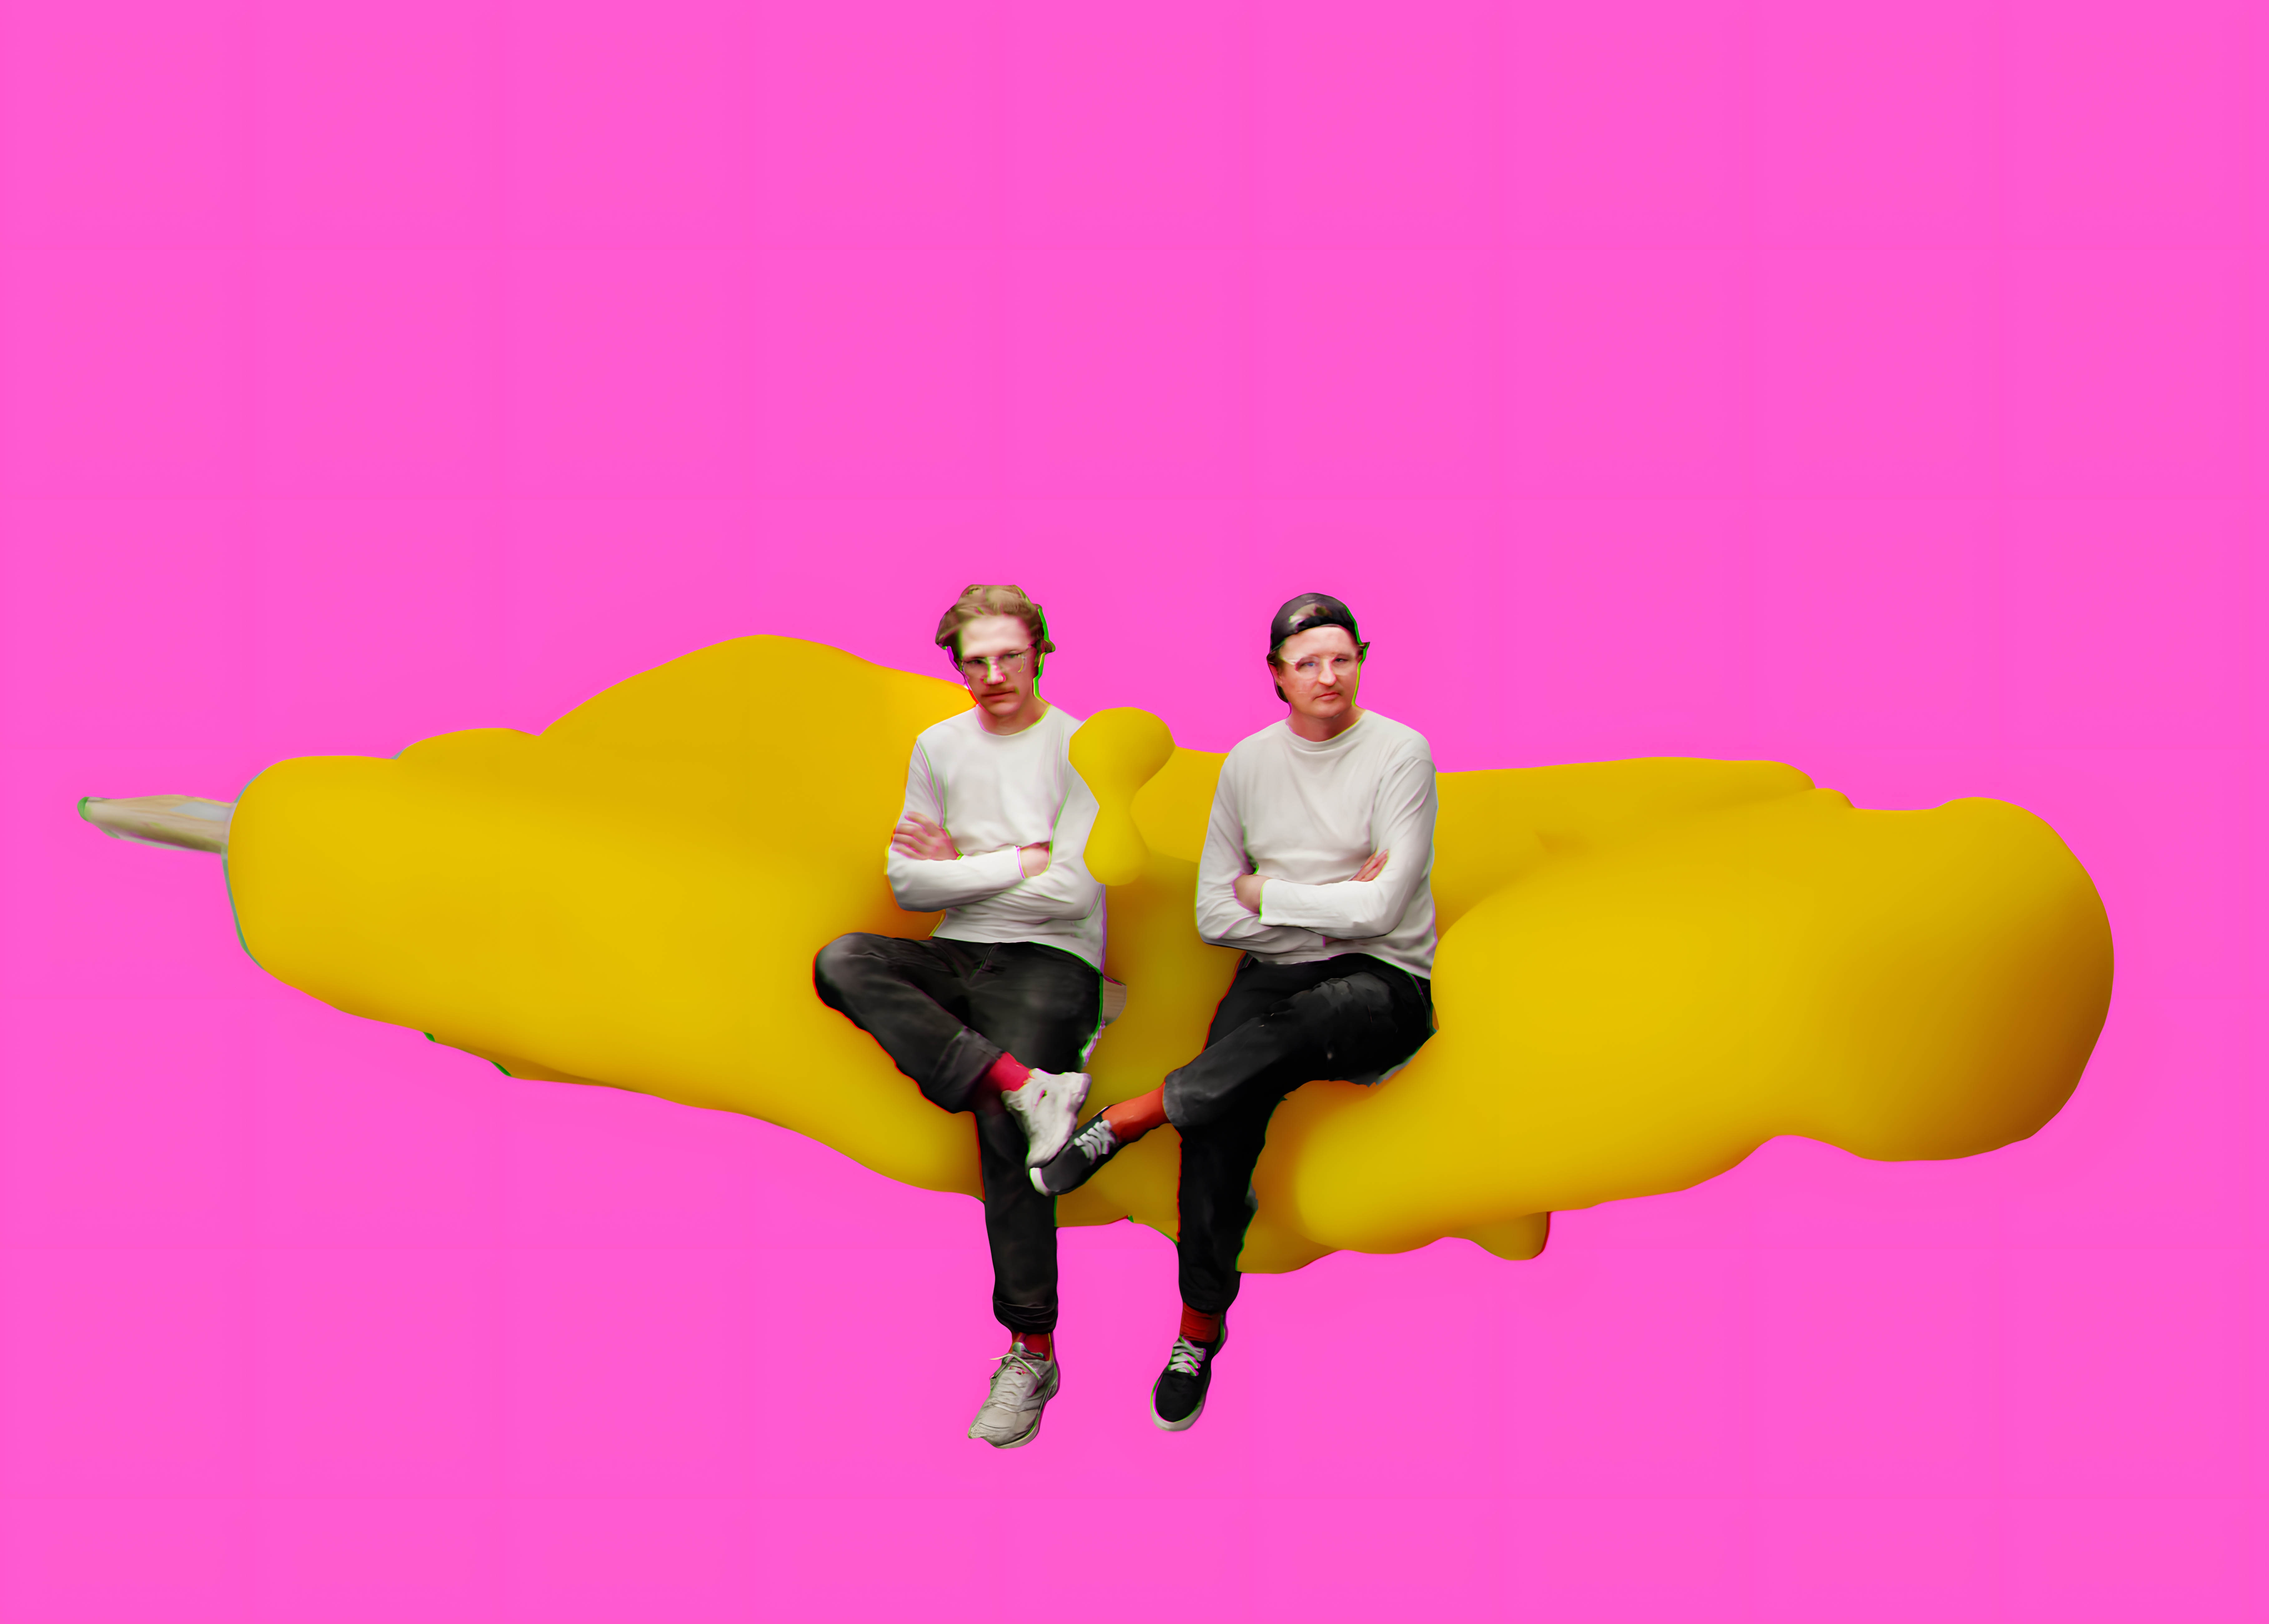 The artists Jan Neukirchen and Christian Lohre sit on a yellow exhibition object - in a digital work of art.